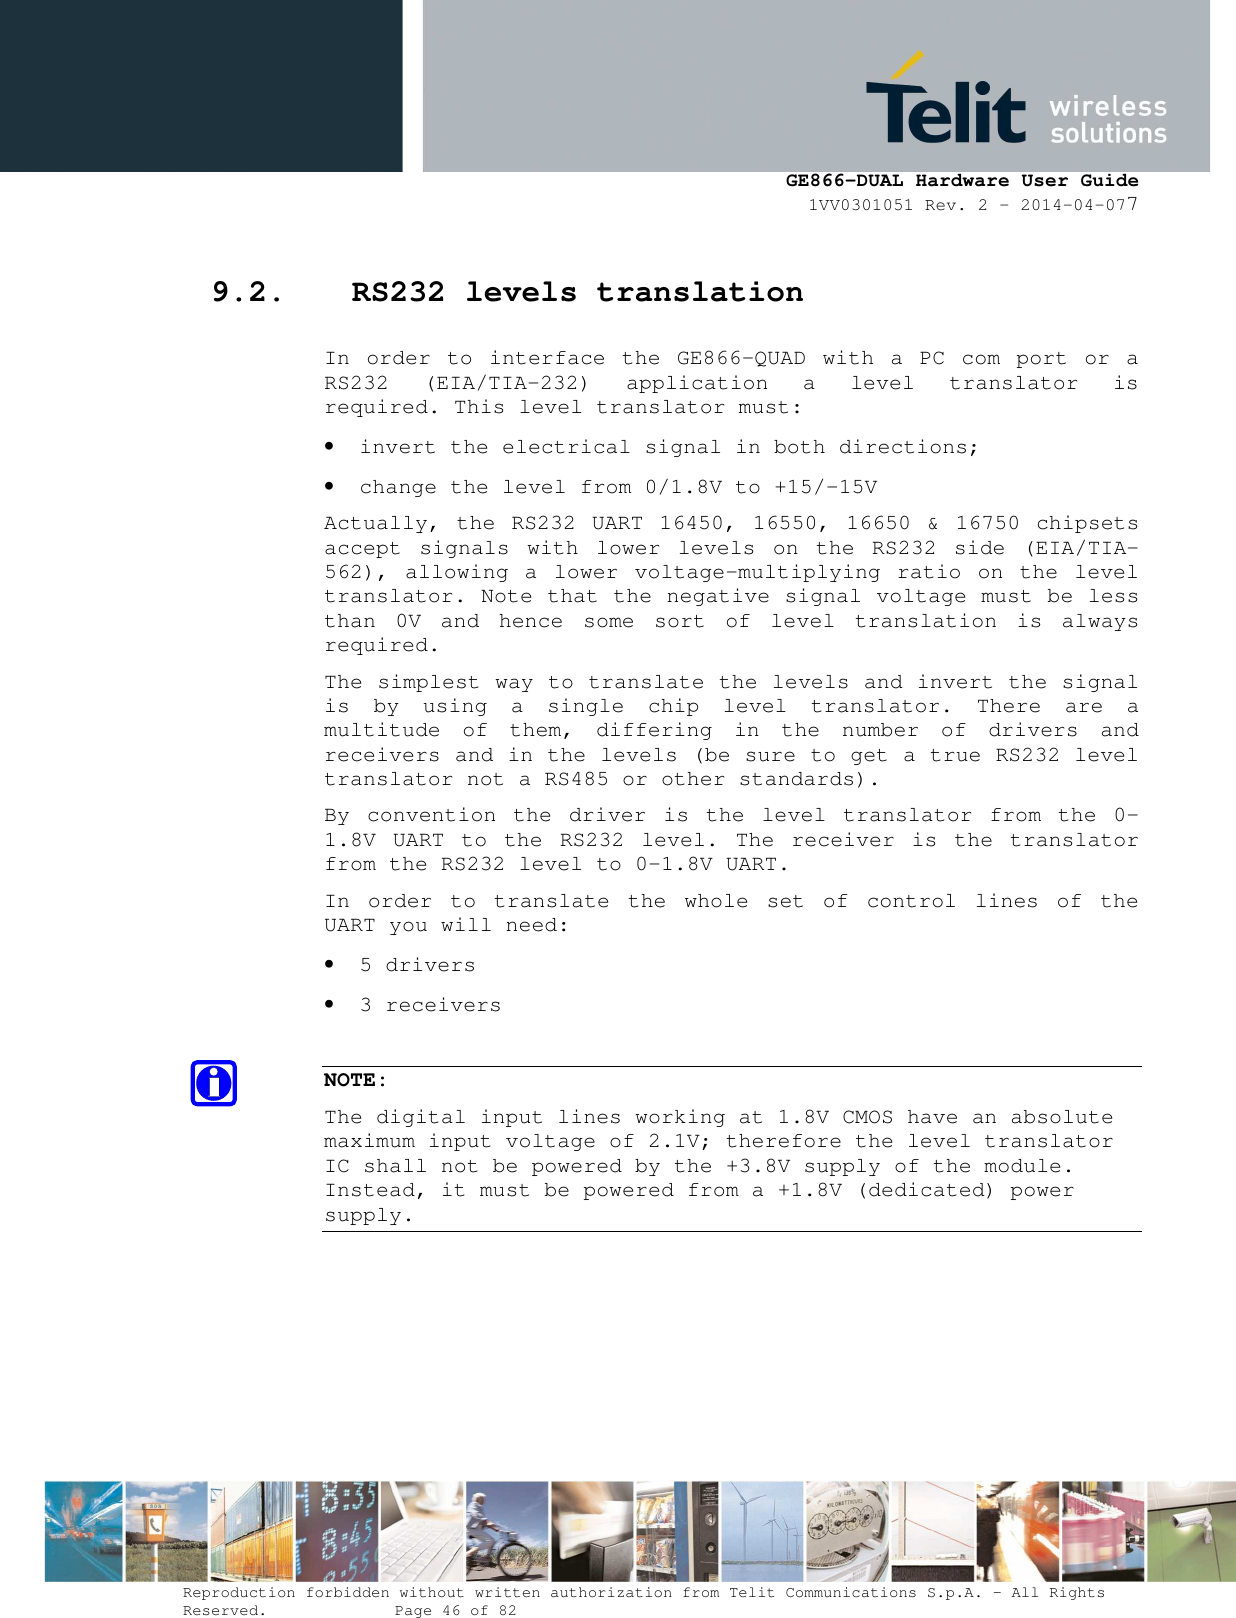      GE866-DUAL Hardware User Guide 1VV0301051 Rev. 2 – 2014-04-077  Reproduction forbidden without written authorization from Telit Communications S.p.A. - All Rights Reserved.    Page 46 of 82 Mod. 0805 2011-07 Rev.2 9.2. RS232 levels translation In  order to  interface  the  GE866-QUAD  with a  PC com  port  or  a RS232  (EIA/TIA-232)  application  a  level  translator  is required. This level translator must: • invert the electrical signal in both directions; • change the level from 0/1.8V to +15/-15V  Actually, the  RS232 UART 16450, 16550, 16650 &amp; 16750  chipsets accept  signals  with  lower  levels  on  the  RS232  side  (EIA/TIA-562), allowing a  lower voltage-multiplying ratio  on  the  level translator. Note that the negative signal voltage must be less than  0V  and  hence  some  sort  of  level  translation  is  always required.  The simplest way to translate the levels and invert the signal is  by  using  a  single  chip  level  translator.  There  are  a multitude  of  them,  differing  in  the  number  of  drivers  and receivers and in the levels (be sure to get a true RS232 level translator not a RS485 or other standards). By  convention  the  driver  is  the  level  translator  from  the  0-1.8V  UART  to  the  RS232  level.  The  receiver  is  the  translator from the RS232 level to 0-1.8V UART. In  order  to  translate  the  whole  set  of  control  lines  of  the UART you will need: • 5 drivers • 3 receivers  NOTE: The digital input lines working at 1.8V CMOS have an absolute maximum input voltage of 2.1V; therefore the level translator IC shall not be powered by the +3.8V supply of the module. Instead, it must be powered from a +1.8V (dedicated) power supply.  